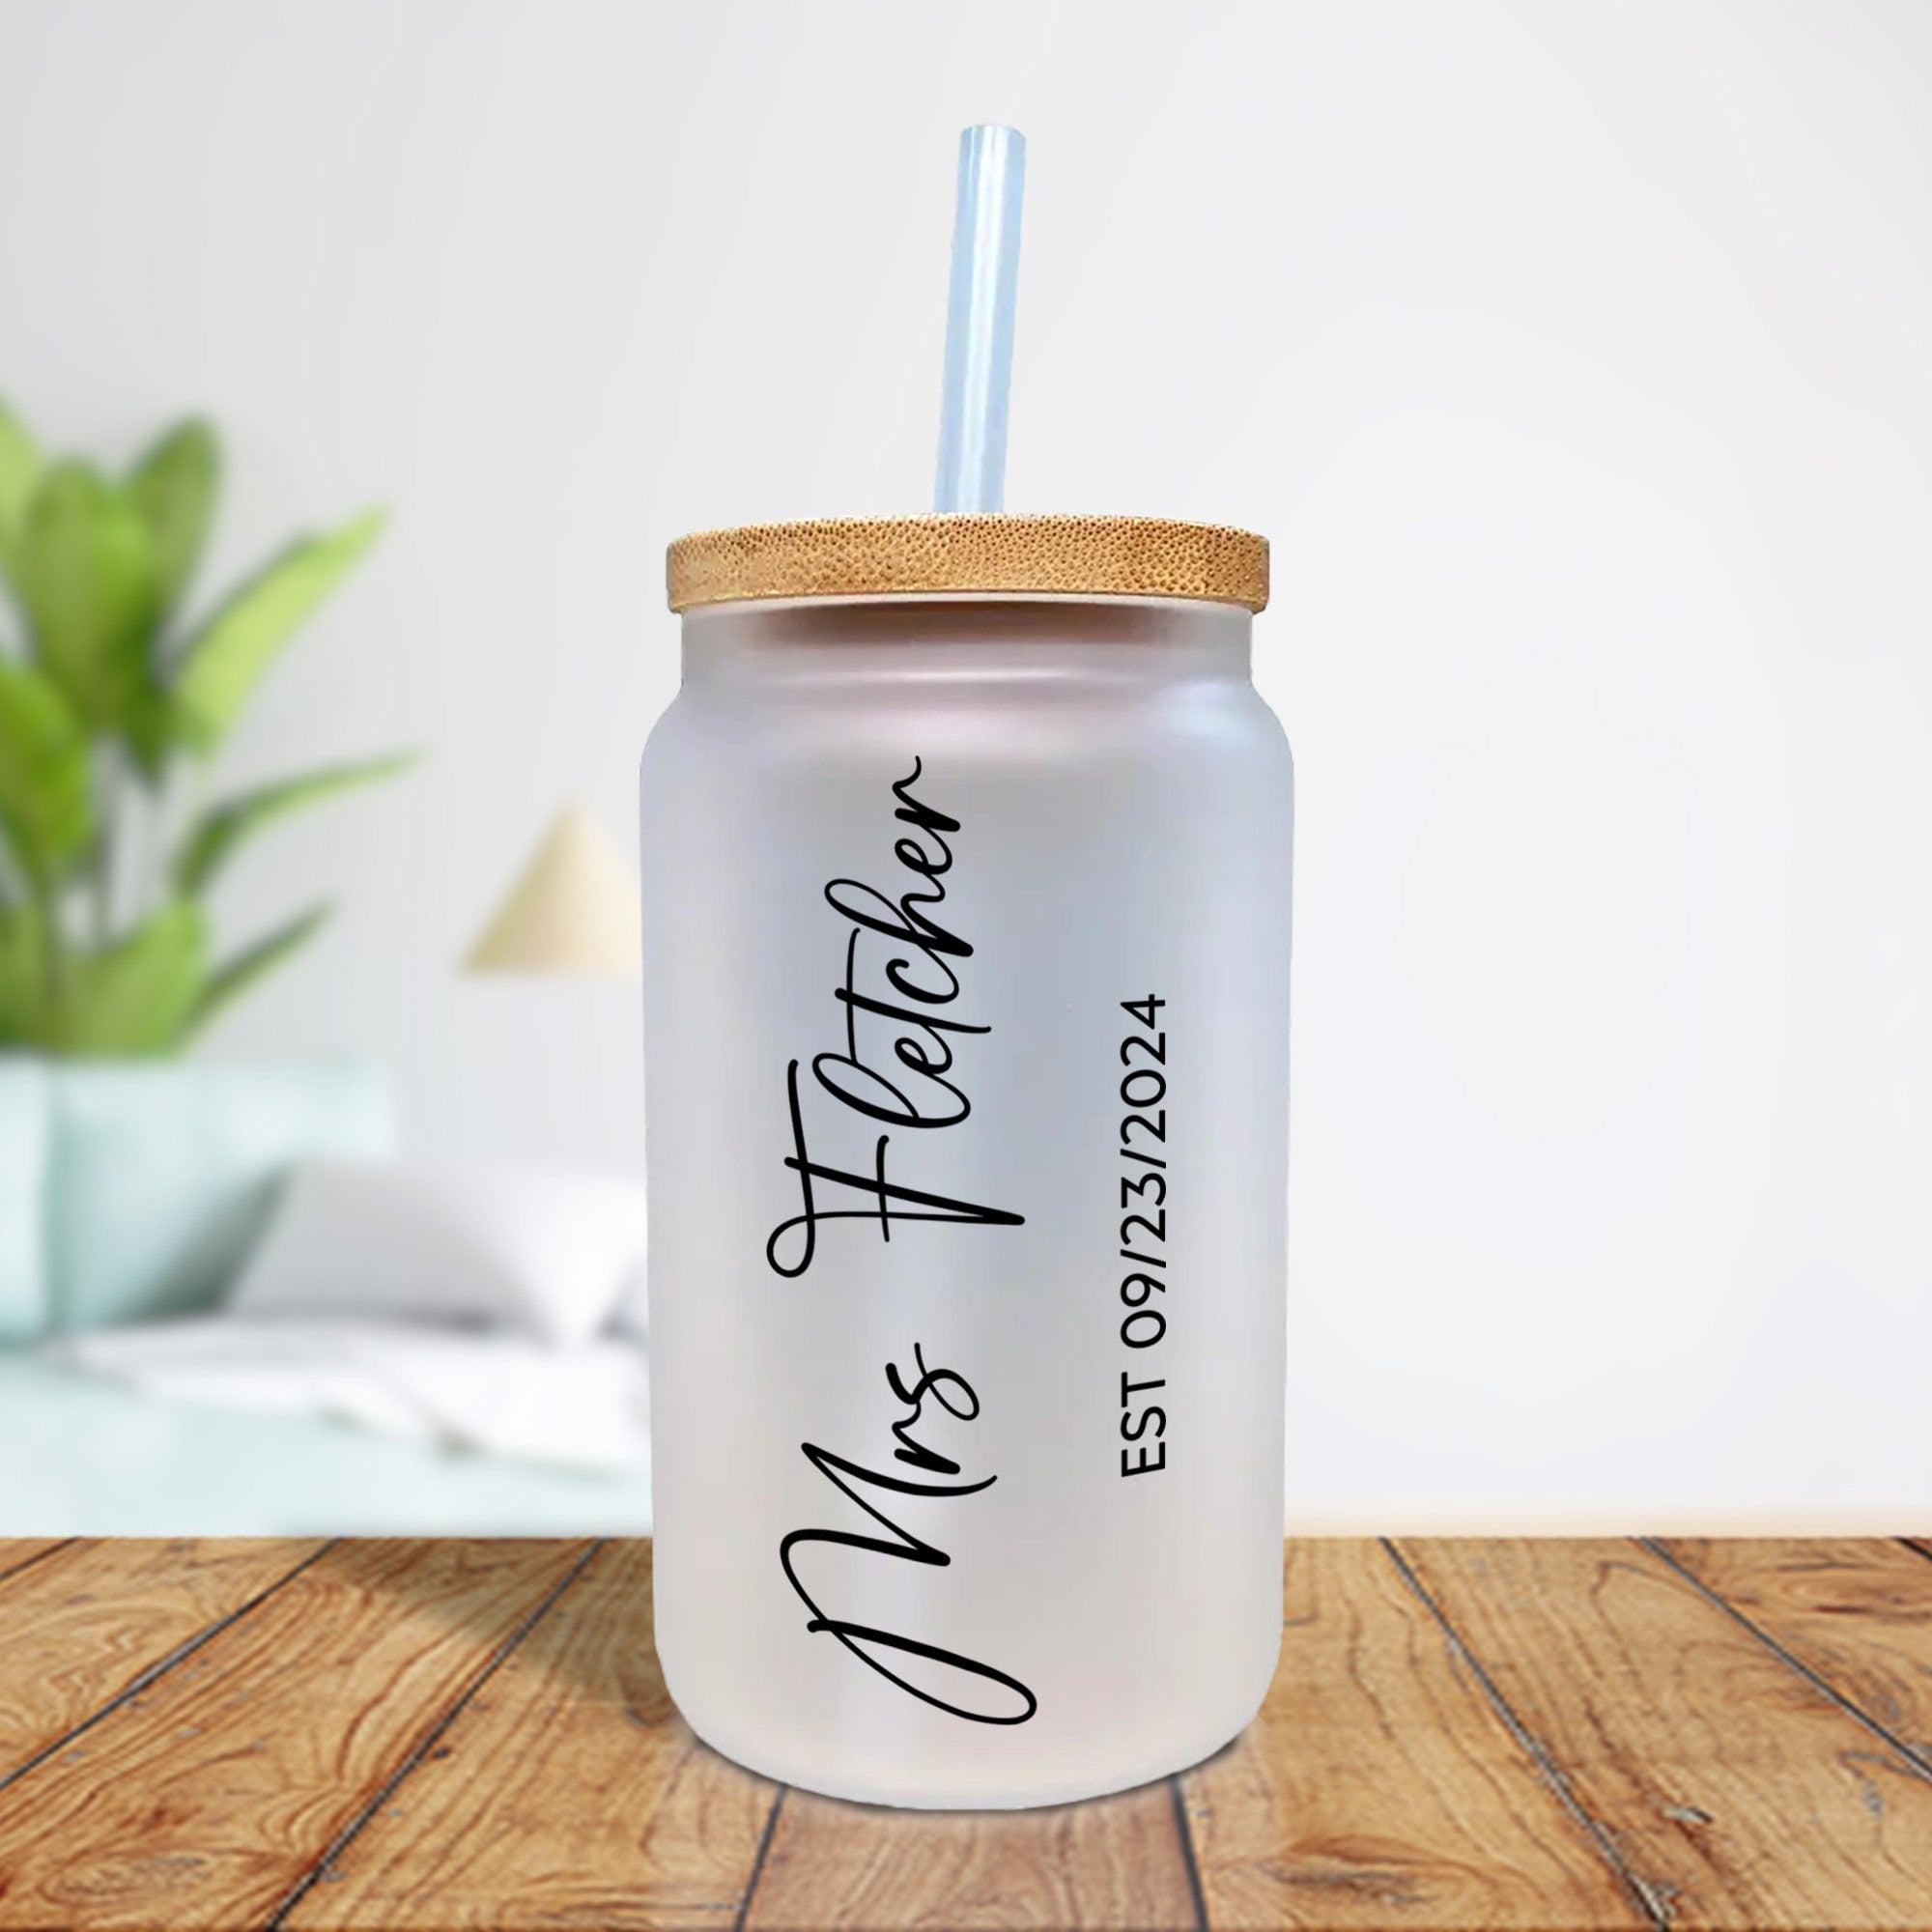 a white mason jar with a straw in it on a wooden table